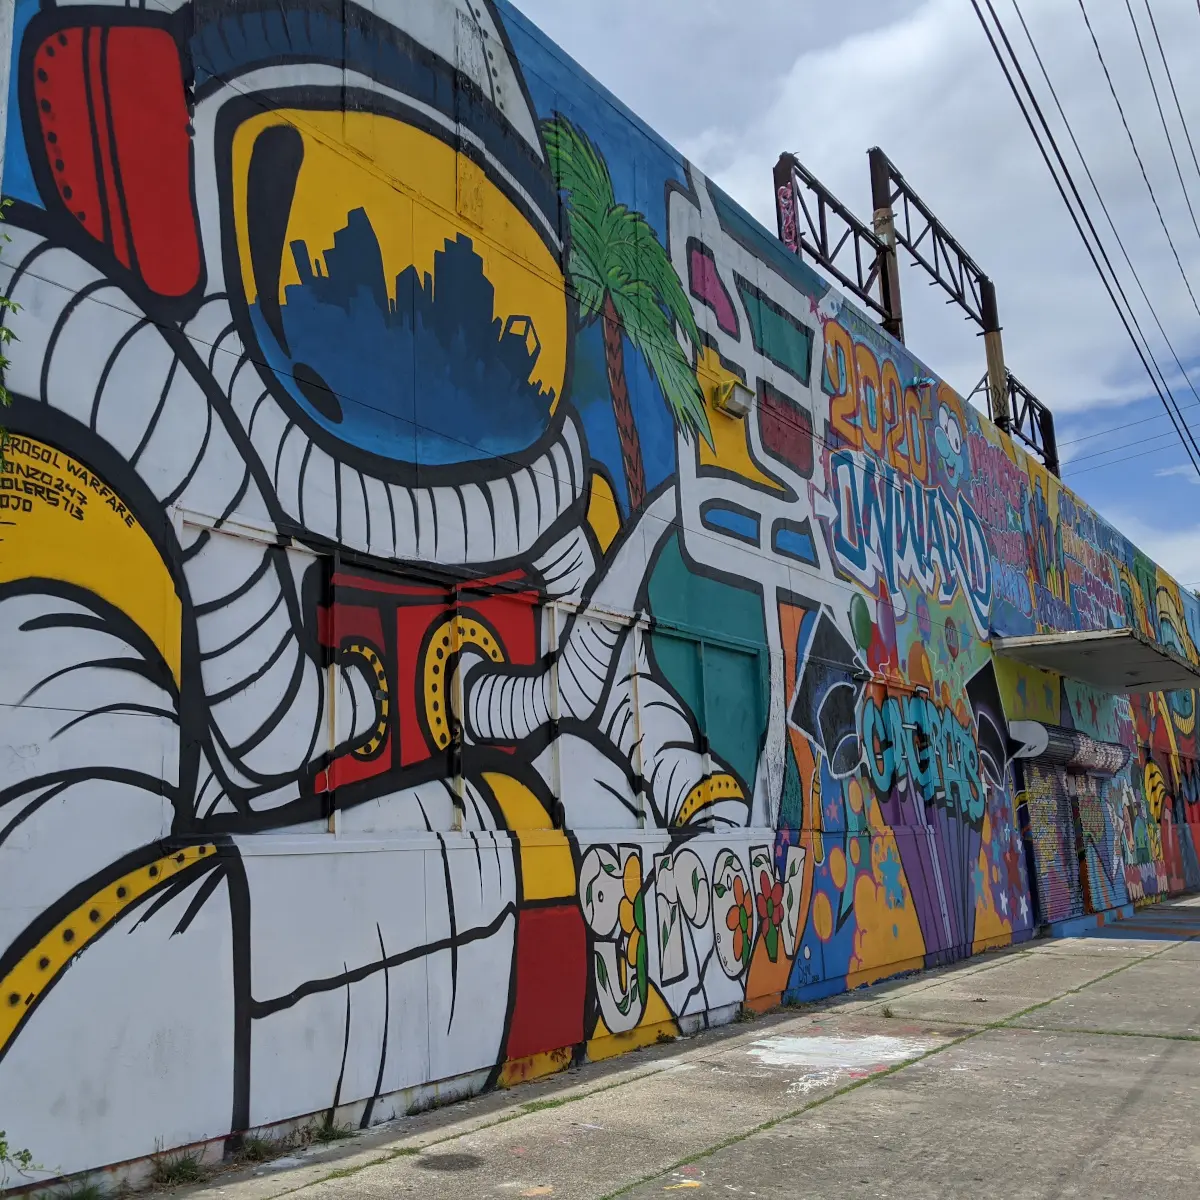 Houston Graffiti Building Astronaut Mural Fun Things to Do in Houston with Kids